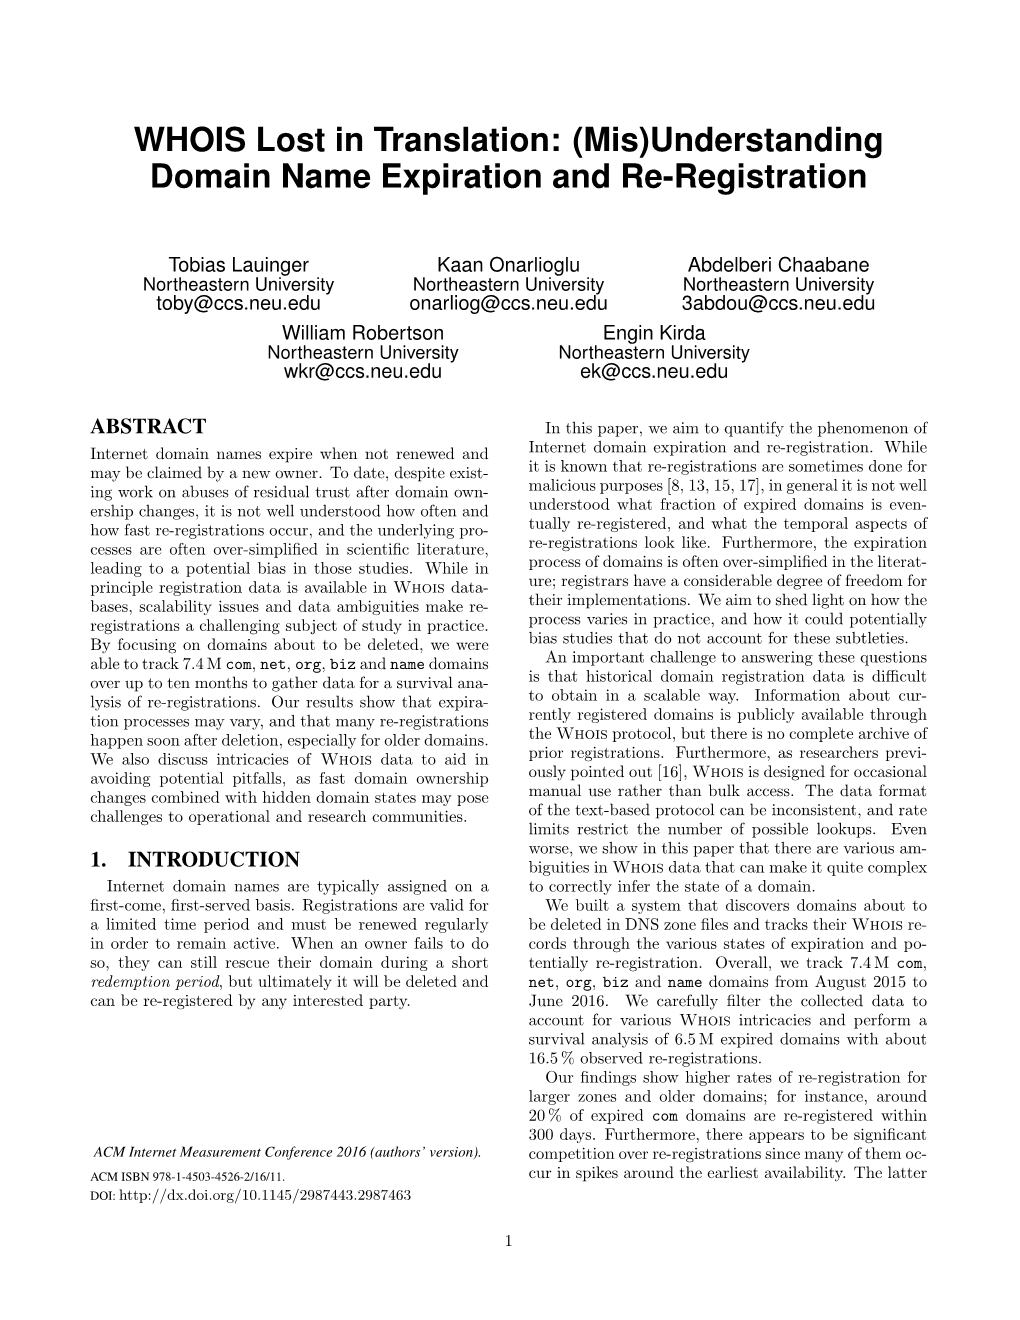 Understanding Domain Name Expiration and Re-Registration